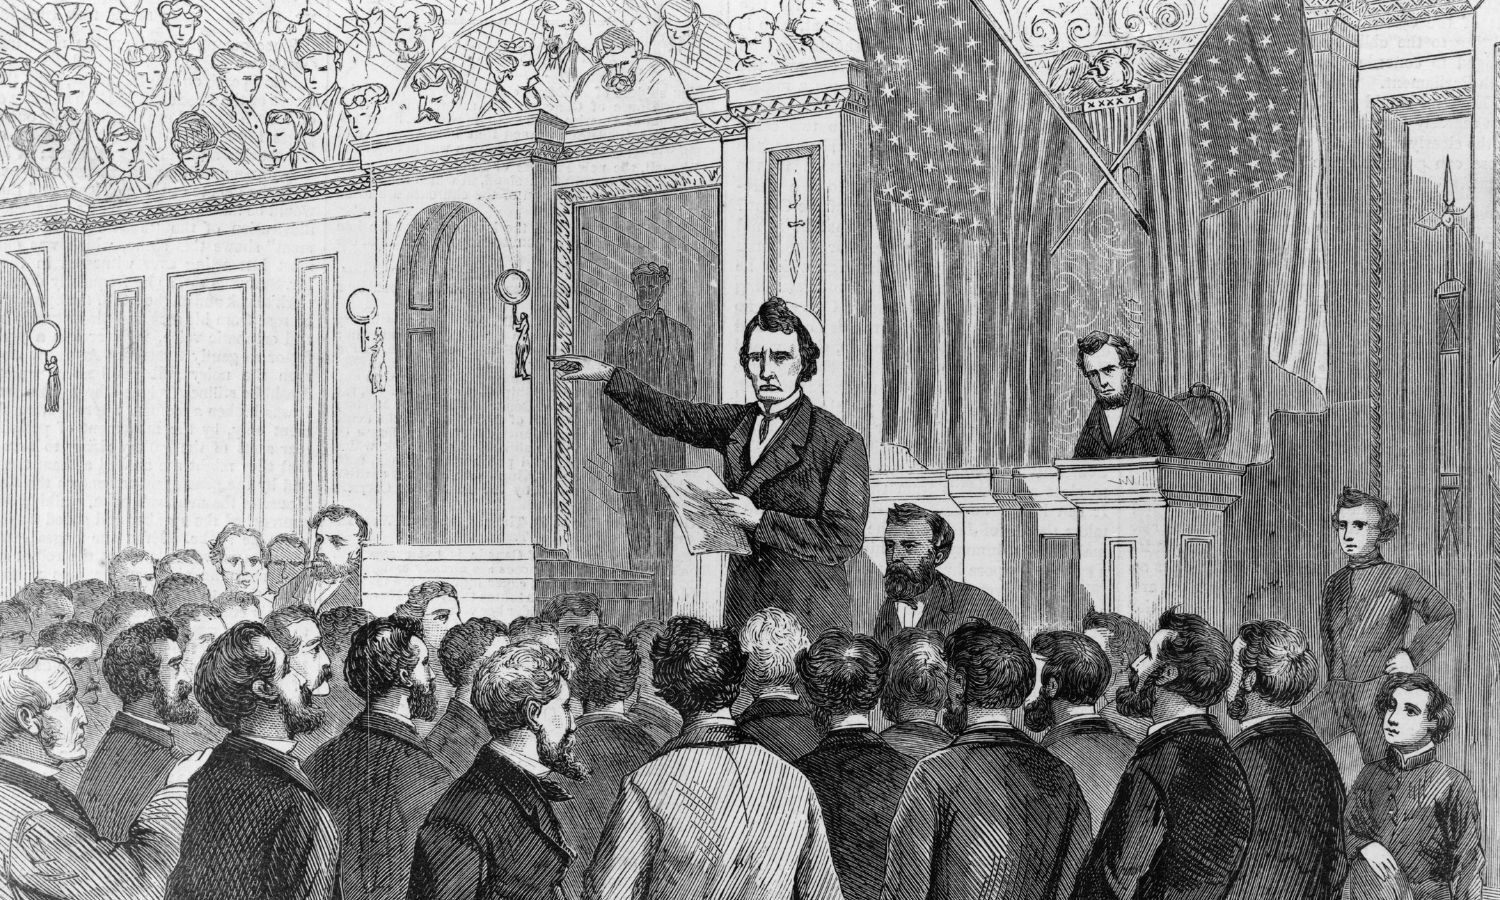 OTD in 1868: The US Senate failed to impeach President Andrew Johnson by one vote.